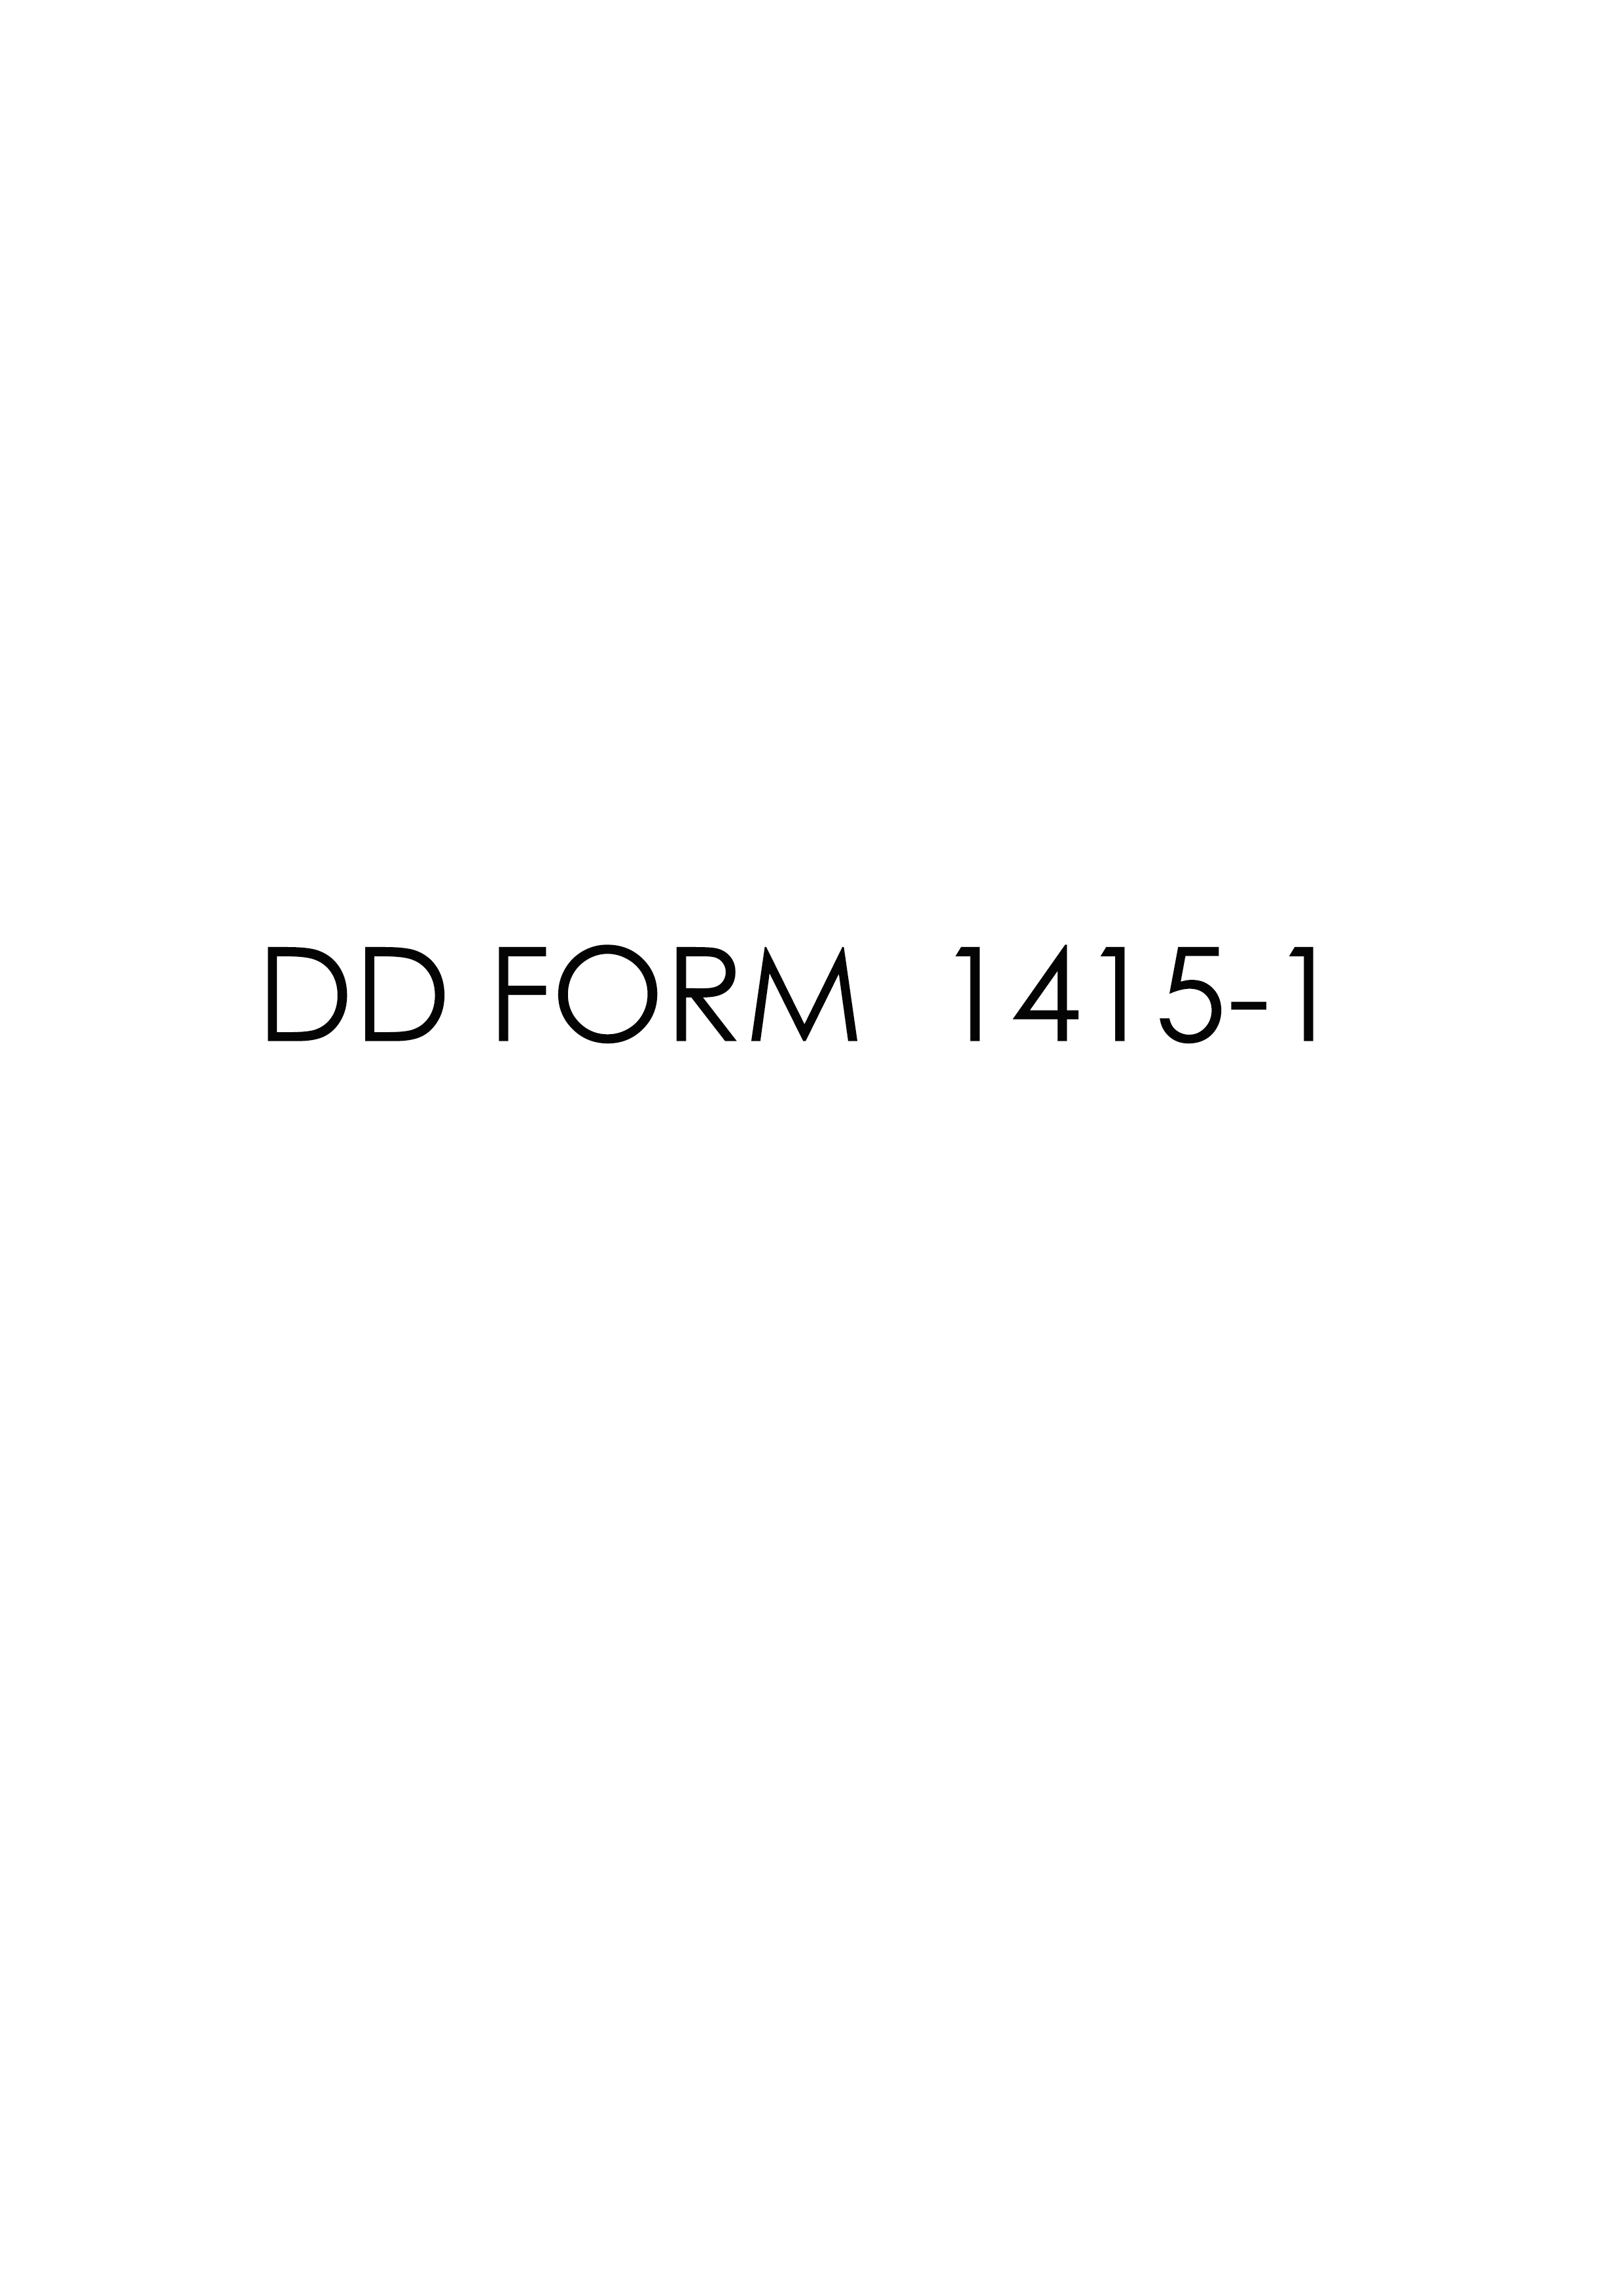 Download Fillable dd Form 1415-1